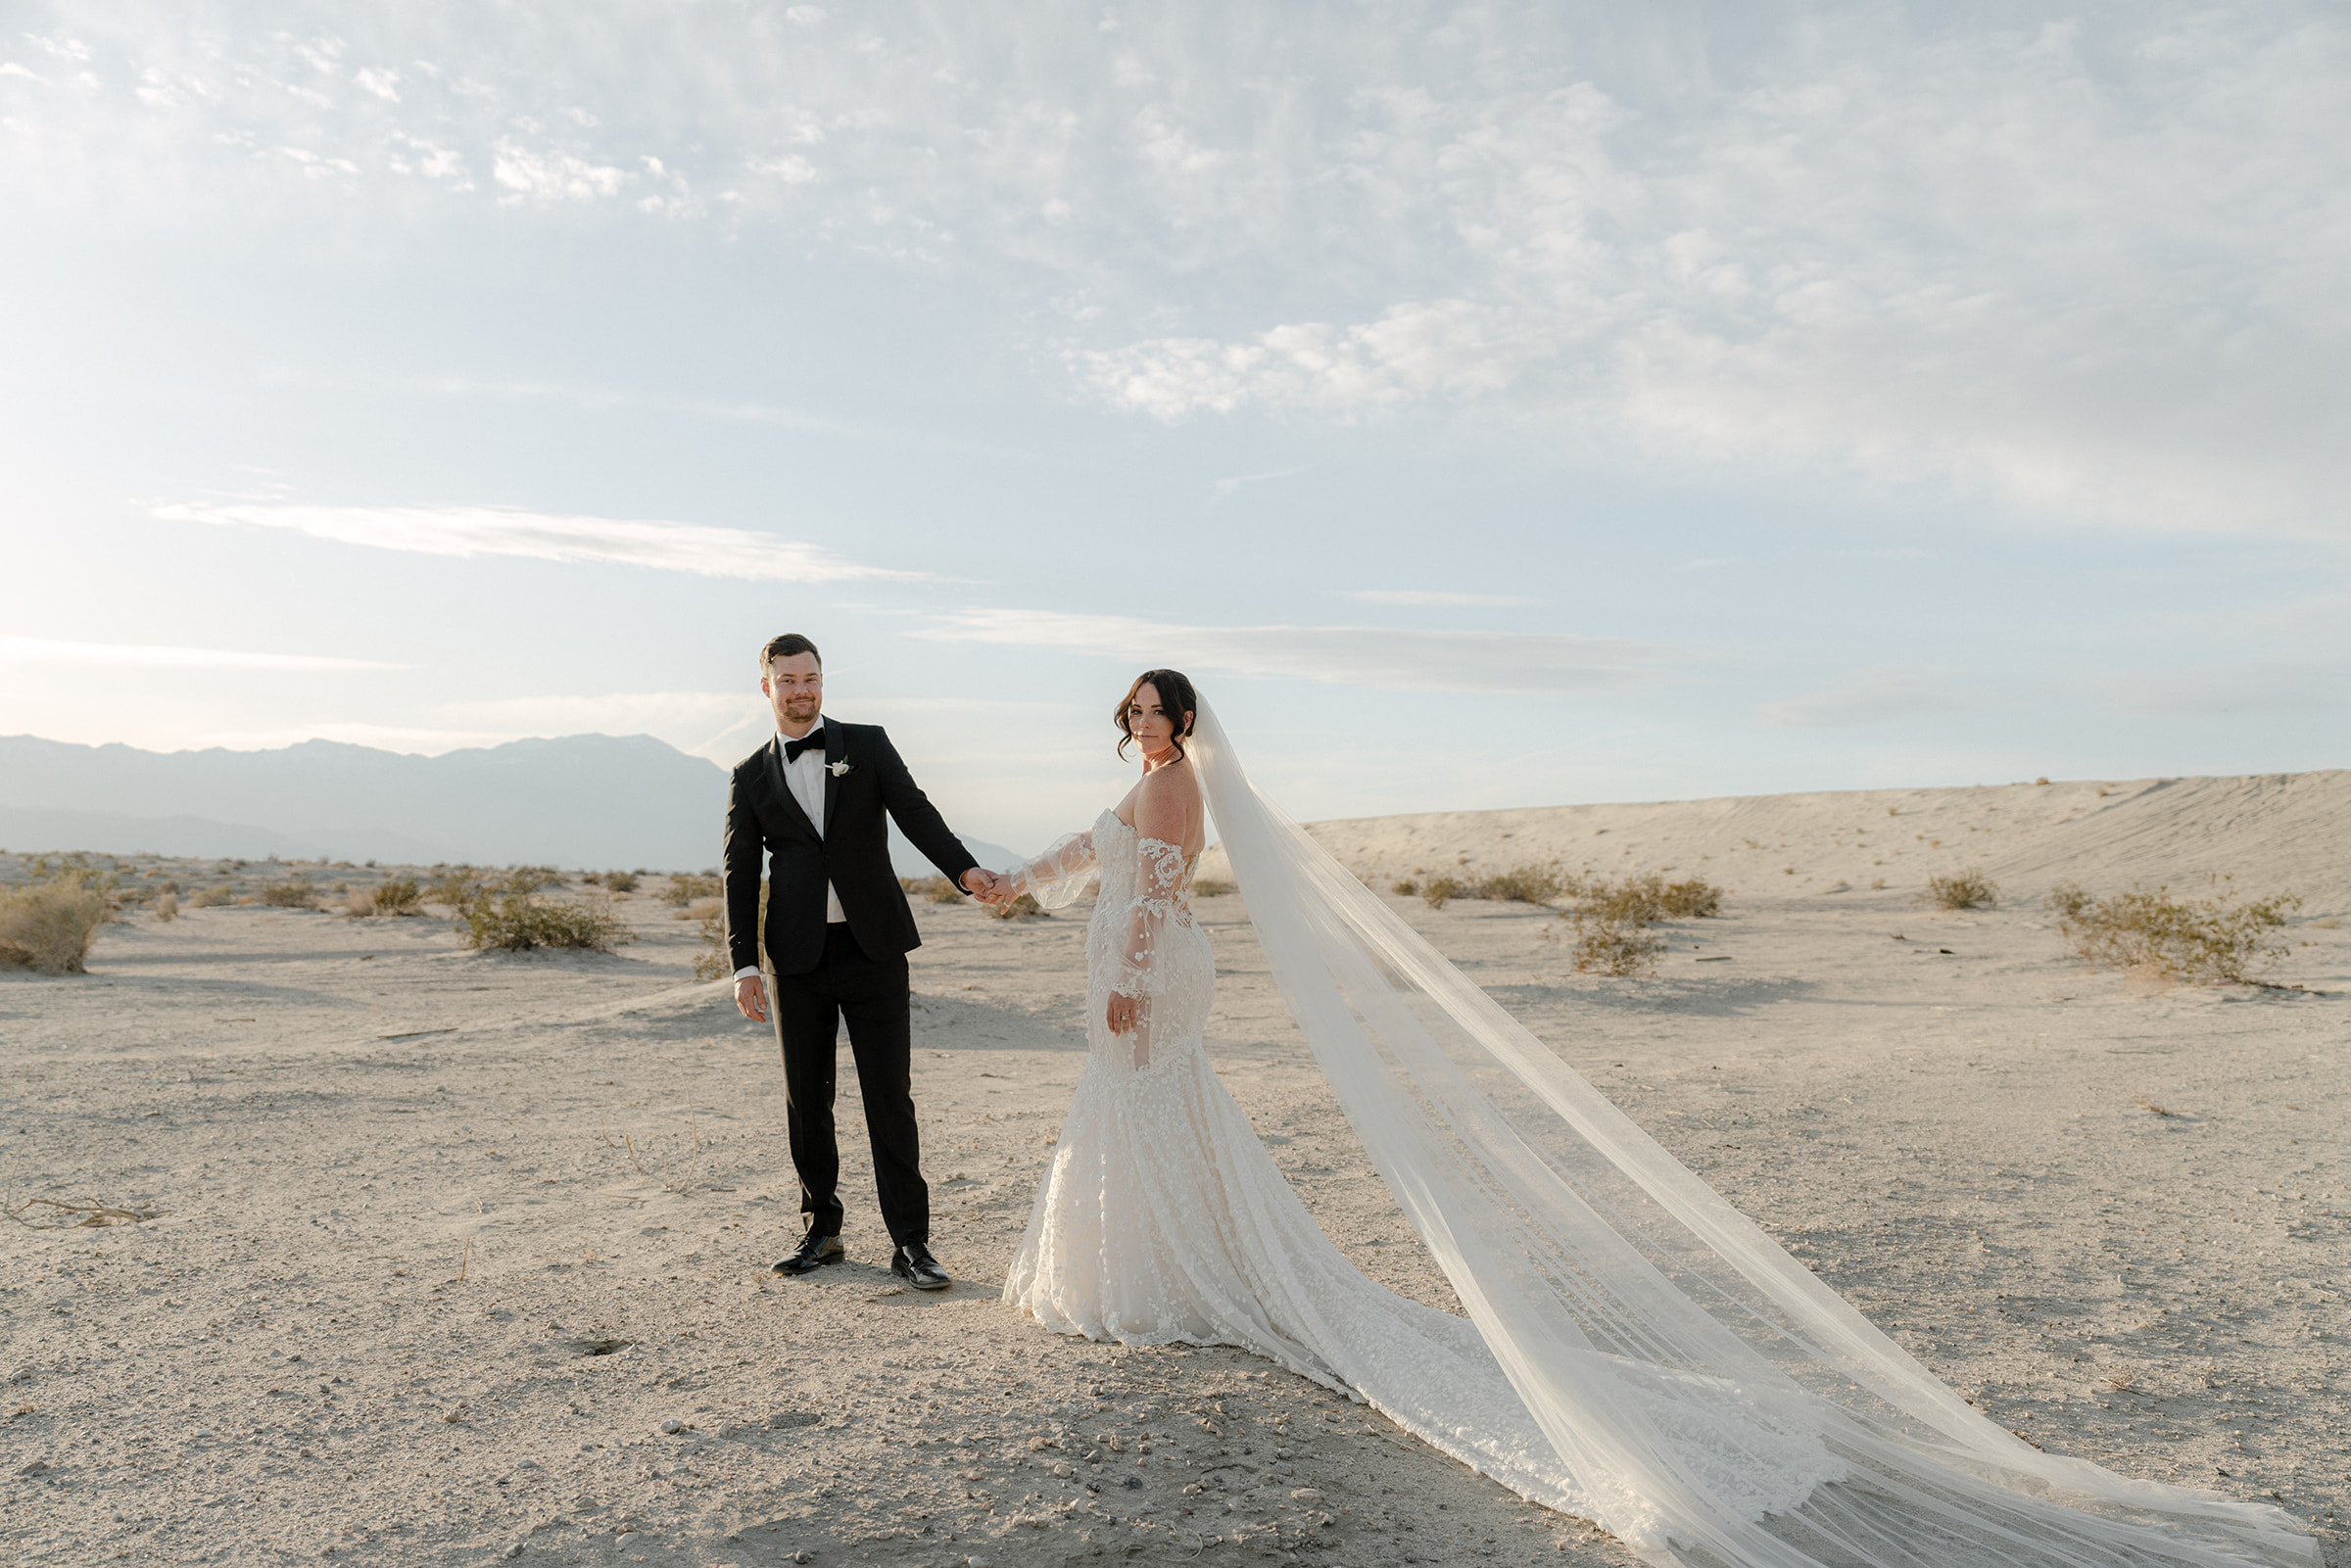 A couple who was just married hold hands in the desert